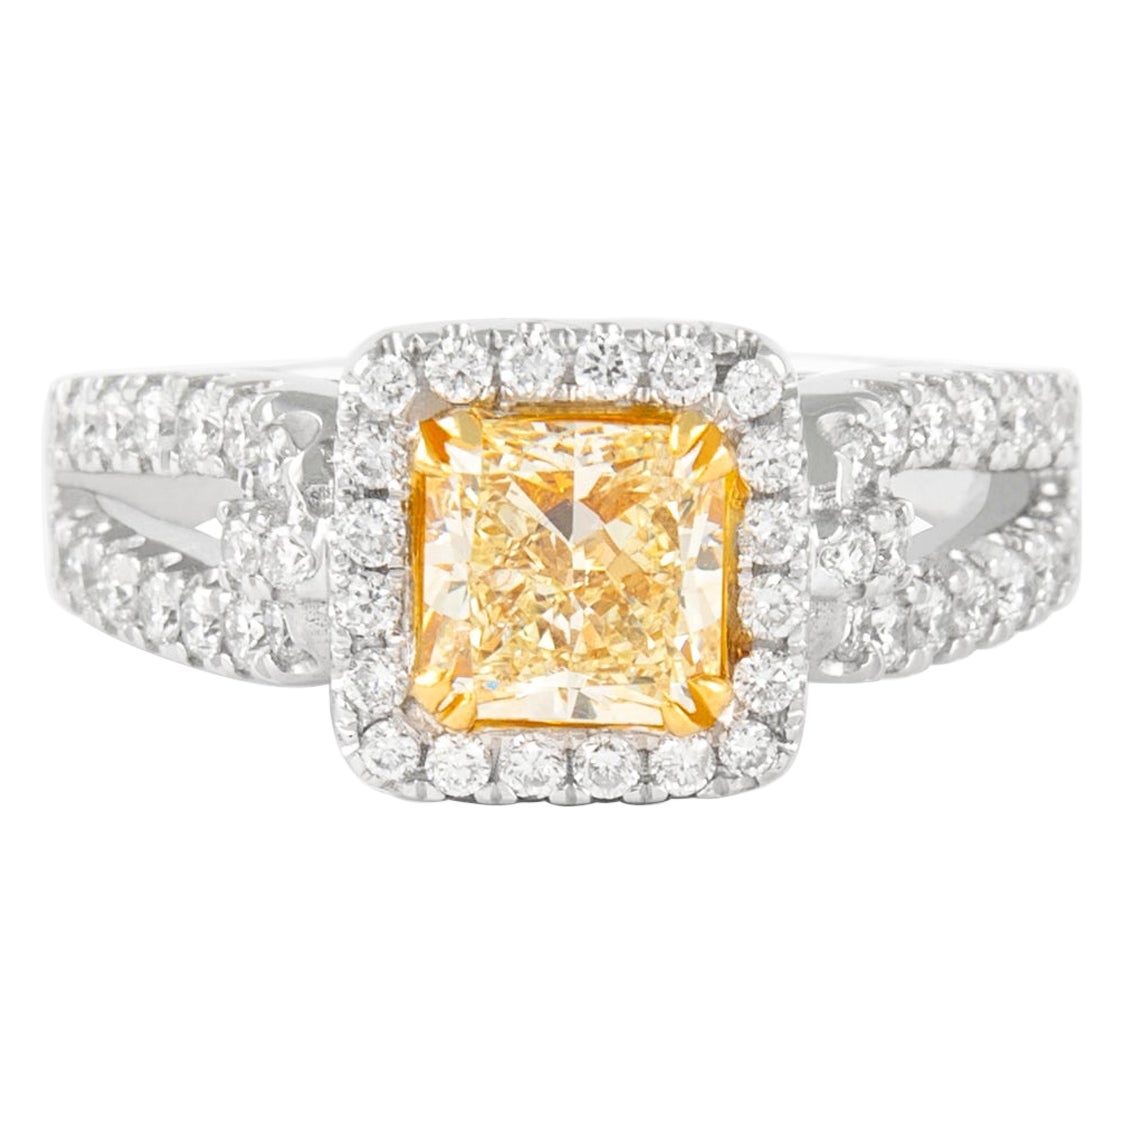 Alexander 1.19ct Fancy Intense Yellow Radiant Diamond with Halo Ring 18k For Sale